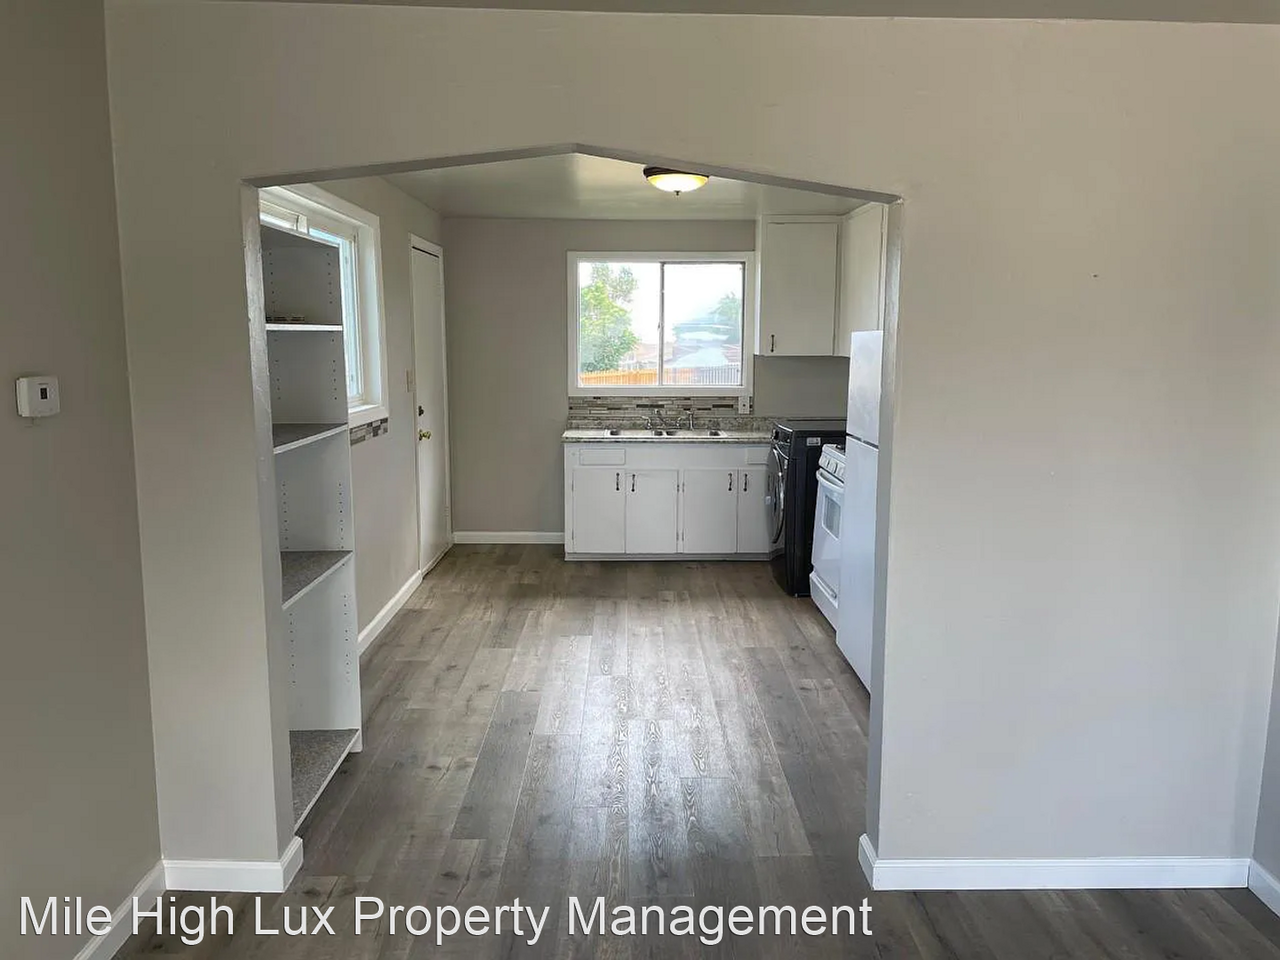 Mile High Lux Property Management and Leasing